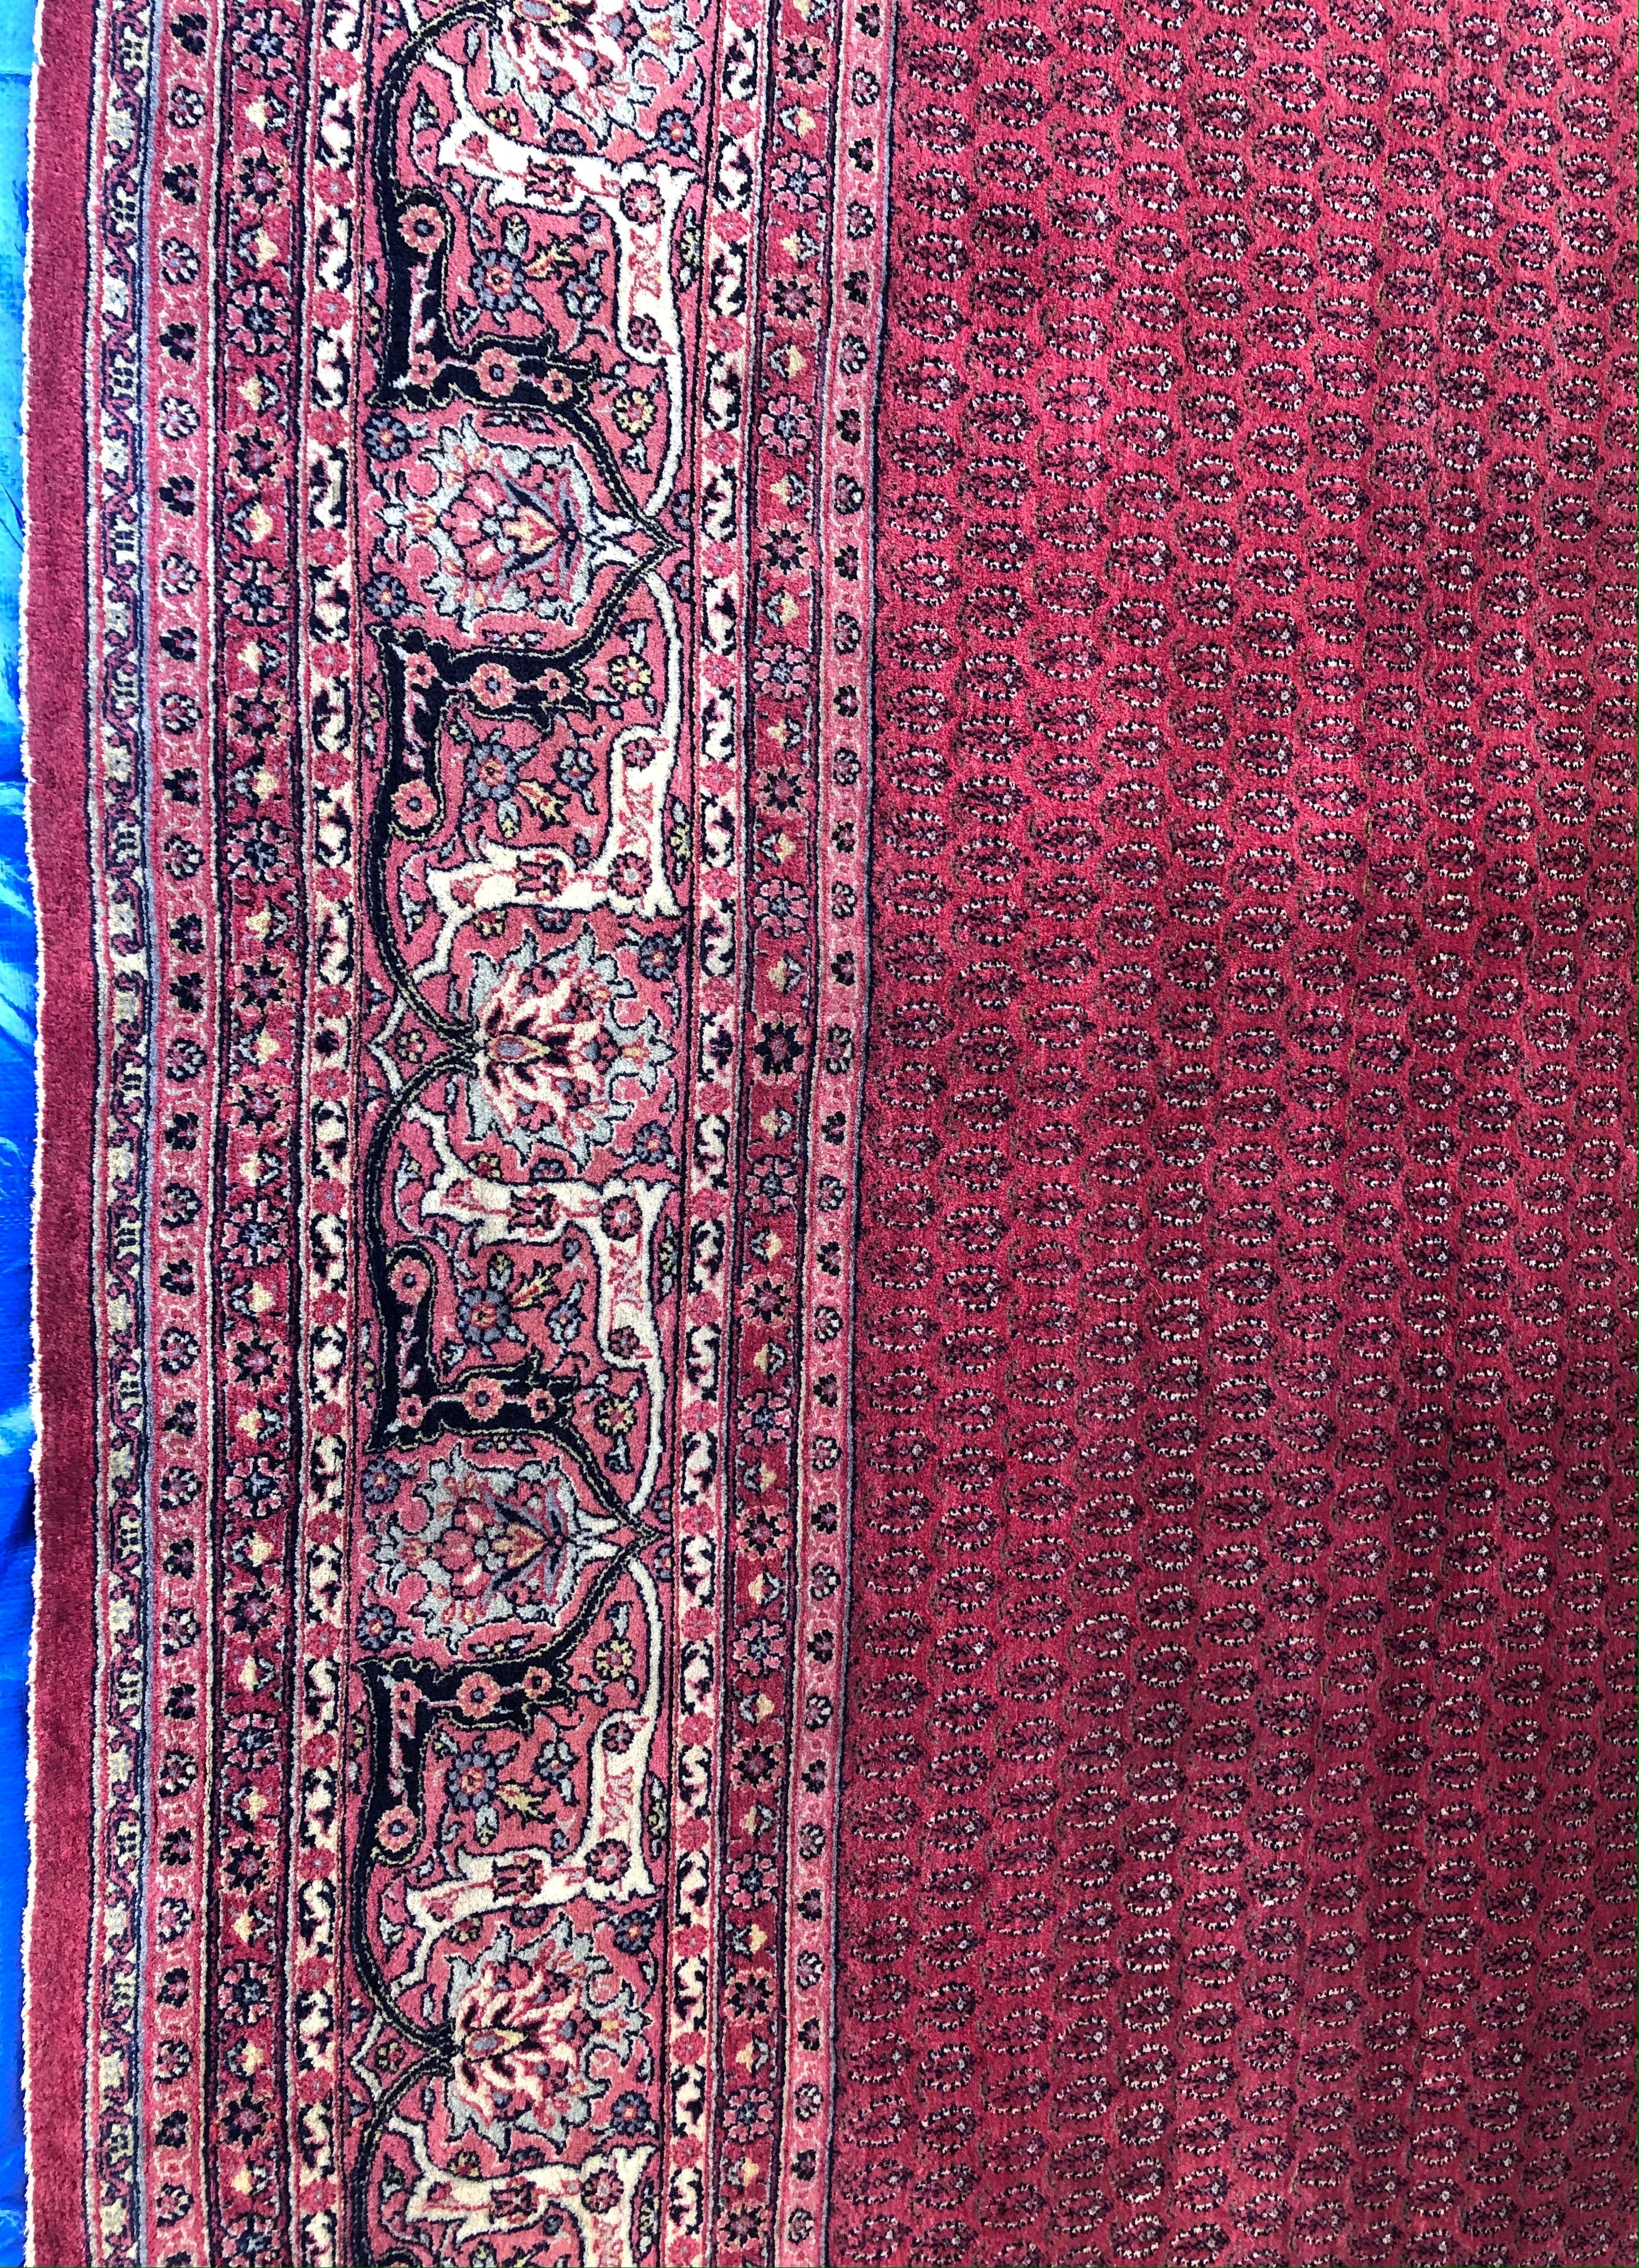 Beautiful decorative rug hand-knotted in the province of northern Kurdistan. The pattern consists of rhombs, mir-e buteh and herati and the carpet is dominated by burgundy and beige colors. The wool is generally of high quality similarly found in